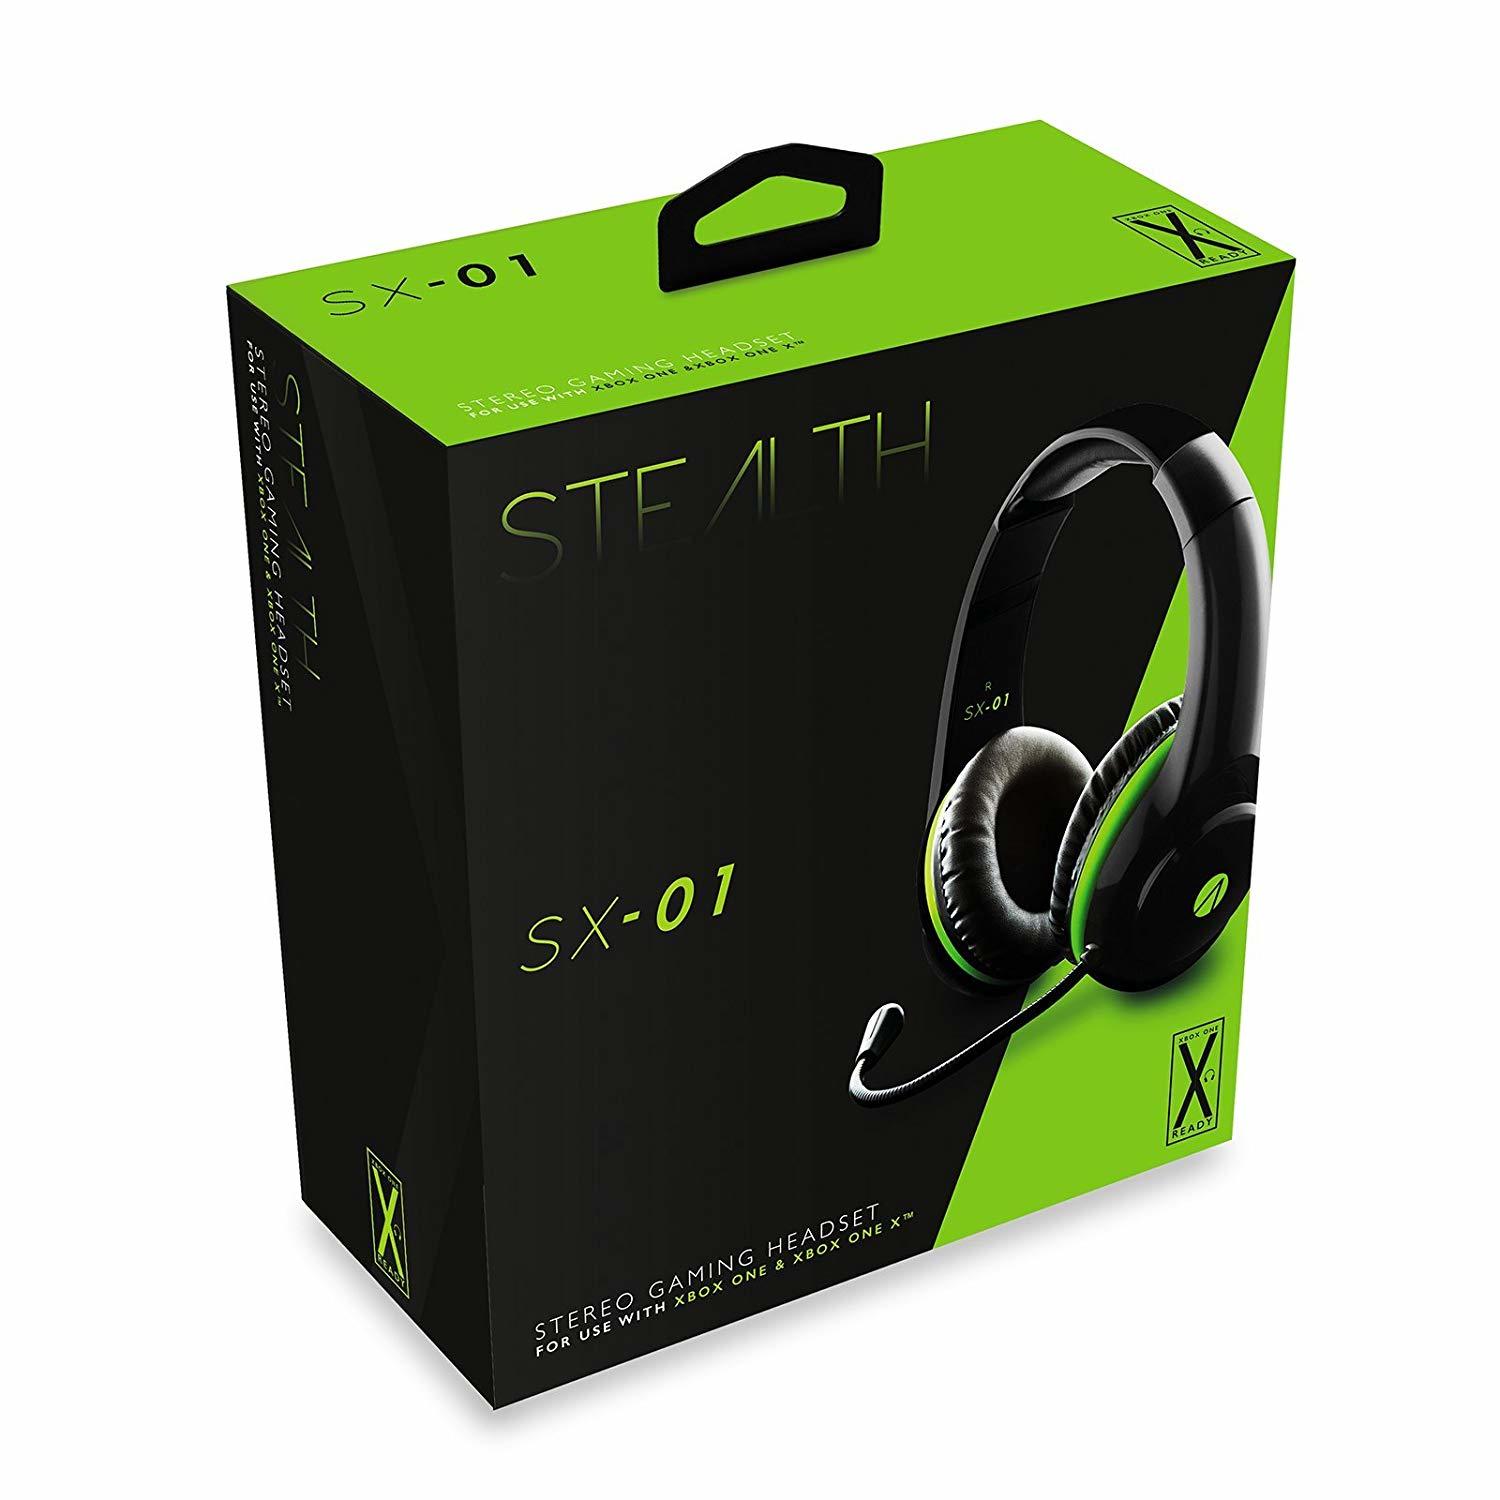 (Xbox Stealth Stereo Gaming One) Headset SX01